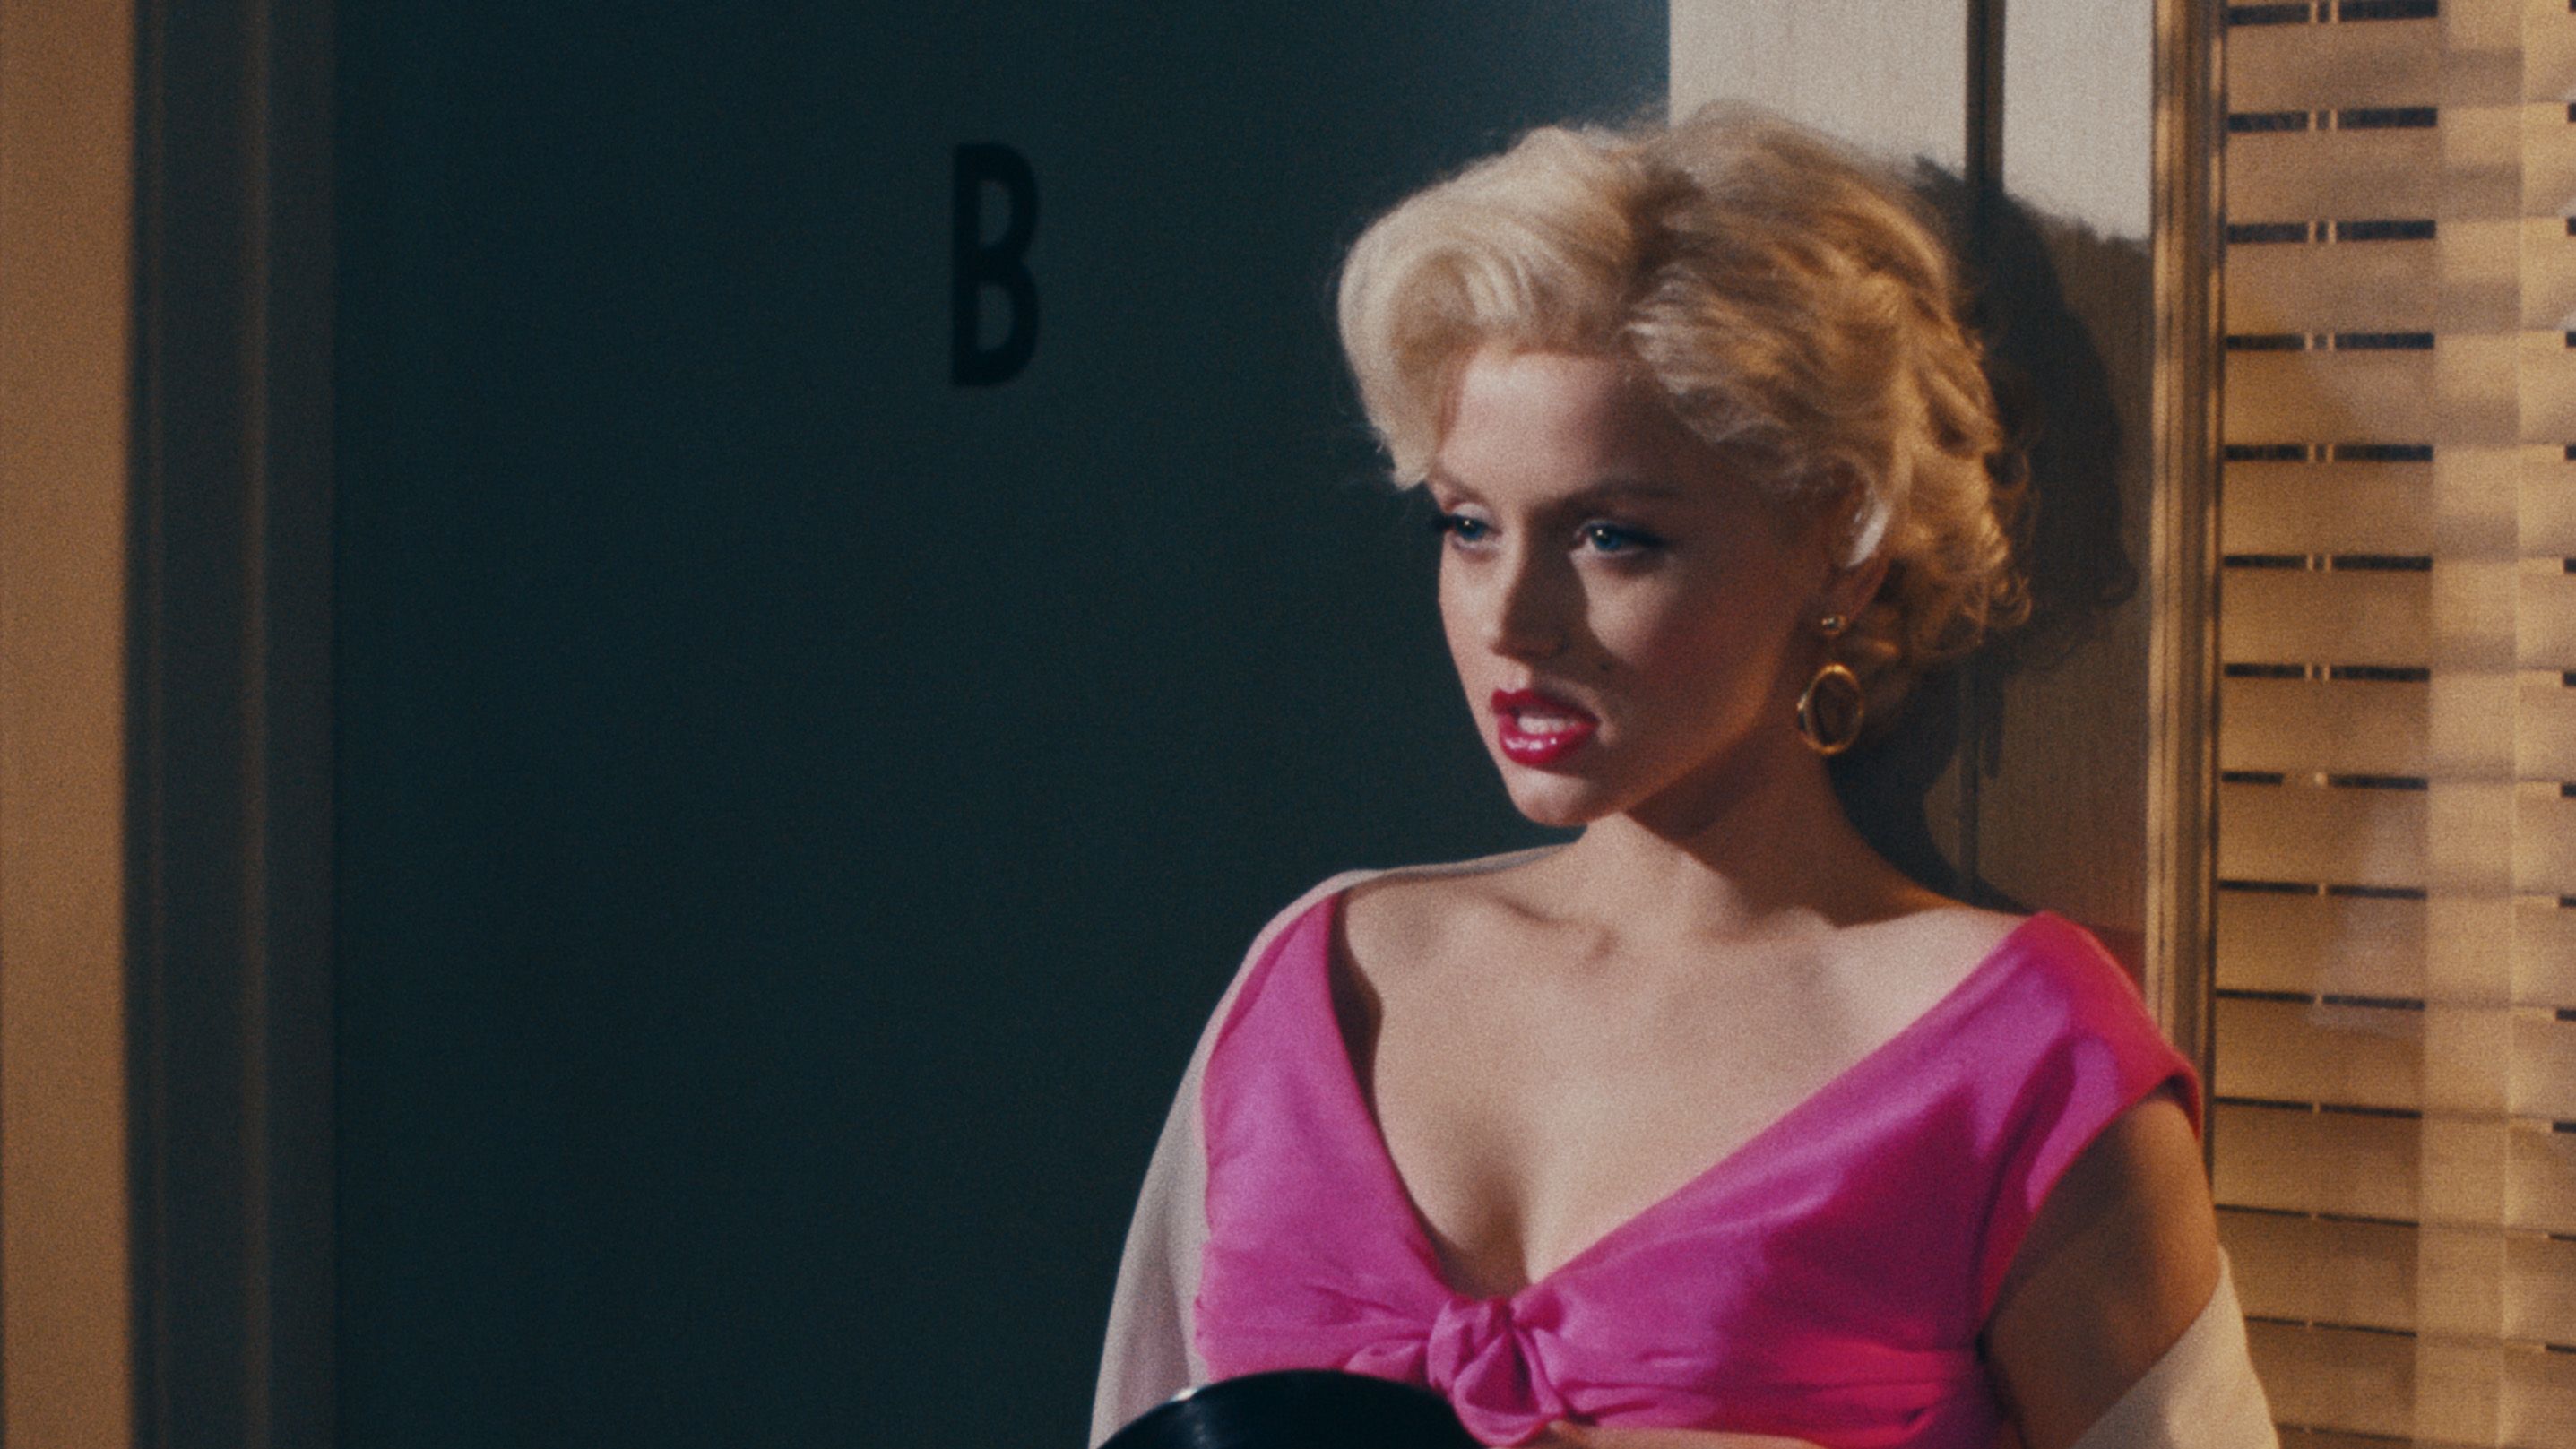 Beautiful Woman Sex Videos Clips Pinterest - The Wigs, Makeup, and Costumes Behind Ana de Armas' Marilyn Monroe  Transformation in 'Blonde'